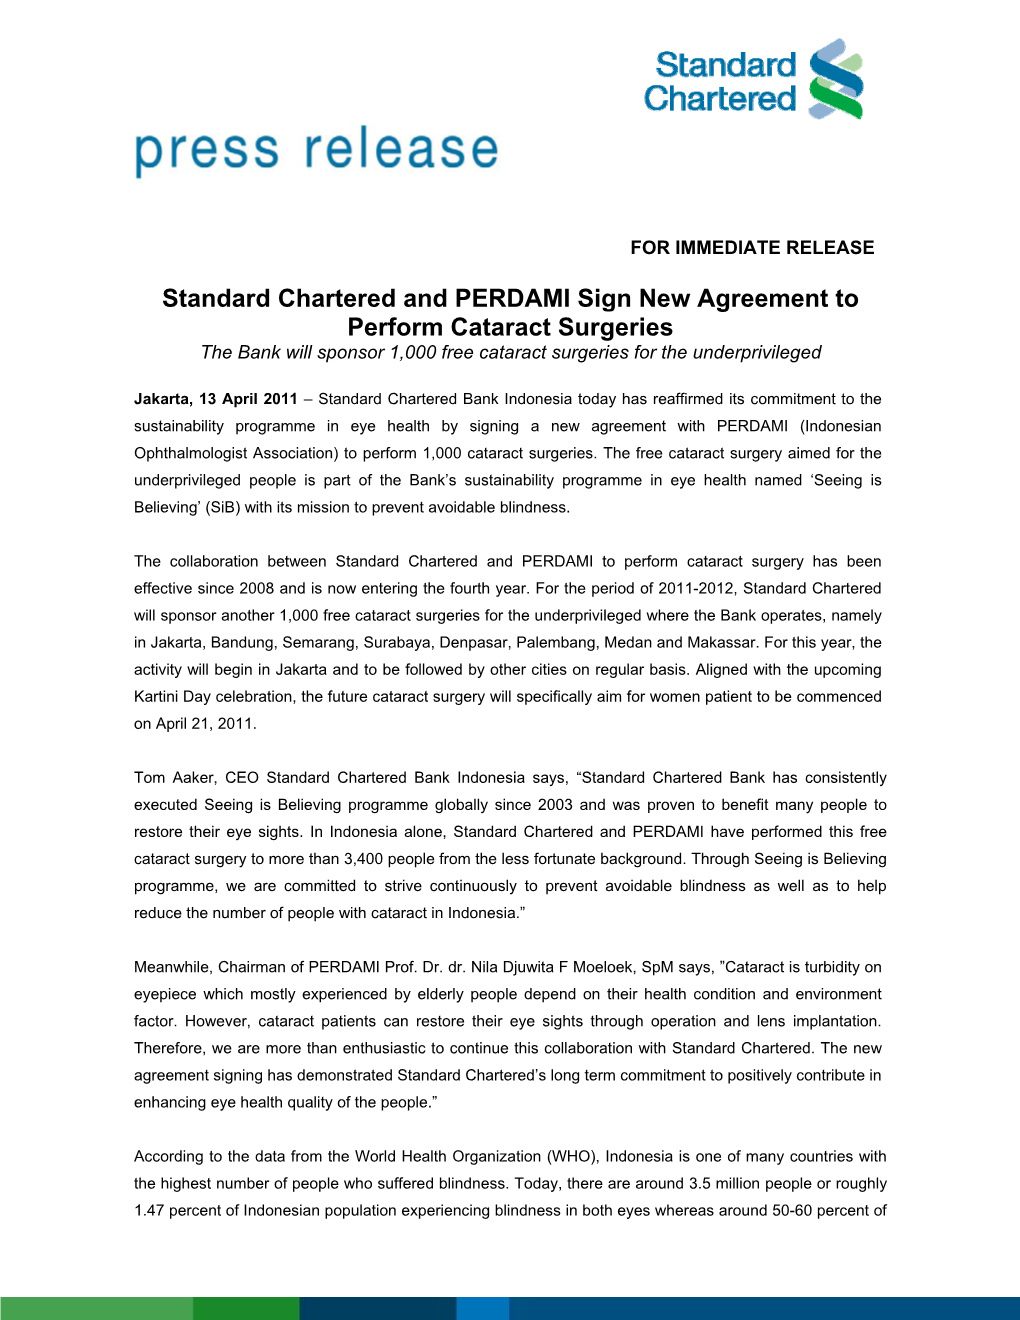 Standard Chartered and PERDAMI Sign New Agreement to Perform Cataract Surgeries the Bank Will Sponsor 1,000 Free Cataract Surgeries for the Underprivileged